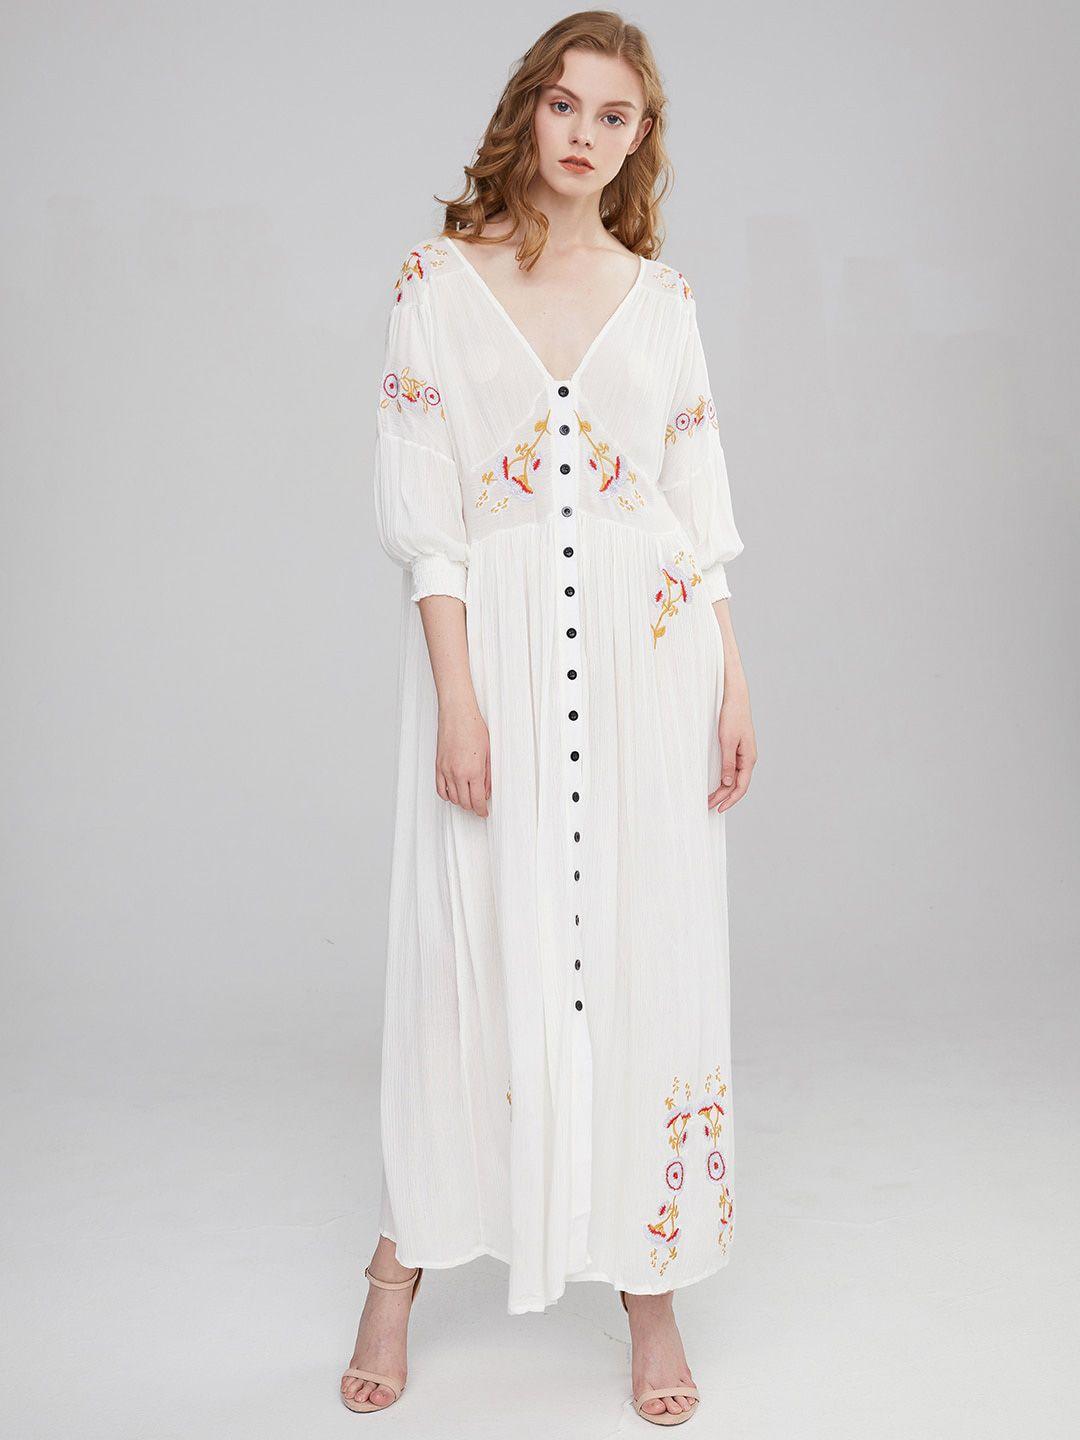 jc collection v-neck floral embroidered pure cotton maxi dress